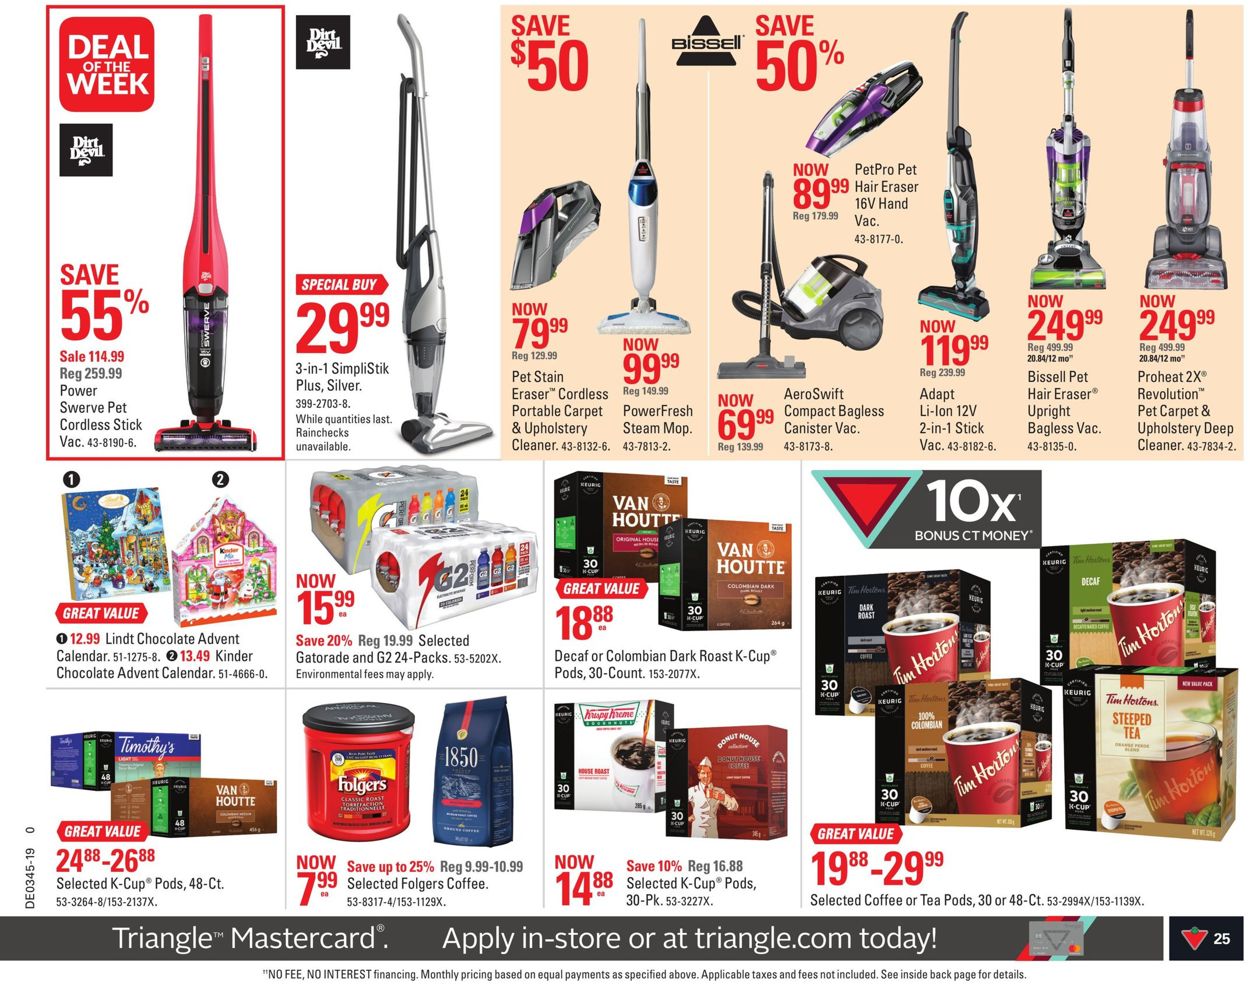 Canadian Tire Flyer from 11/01/2019